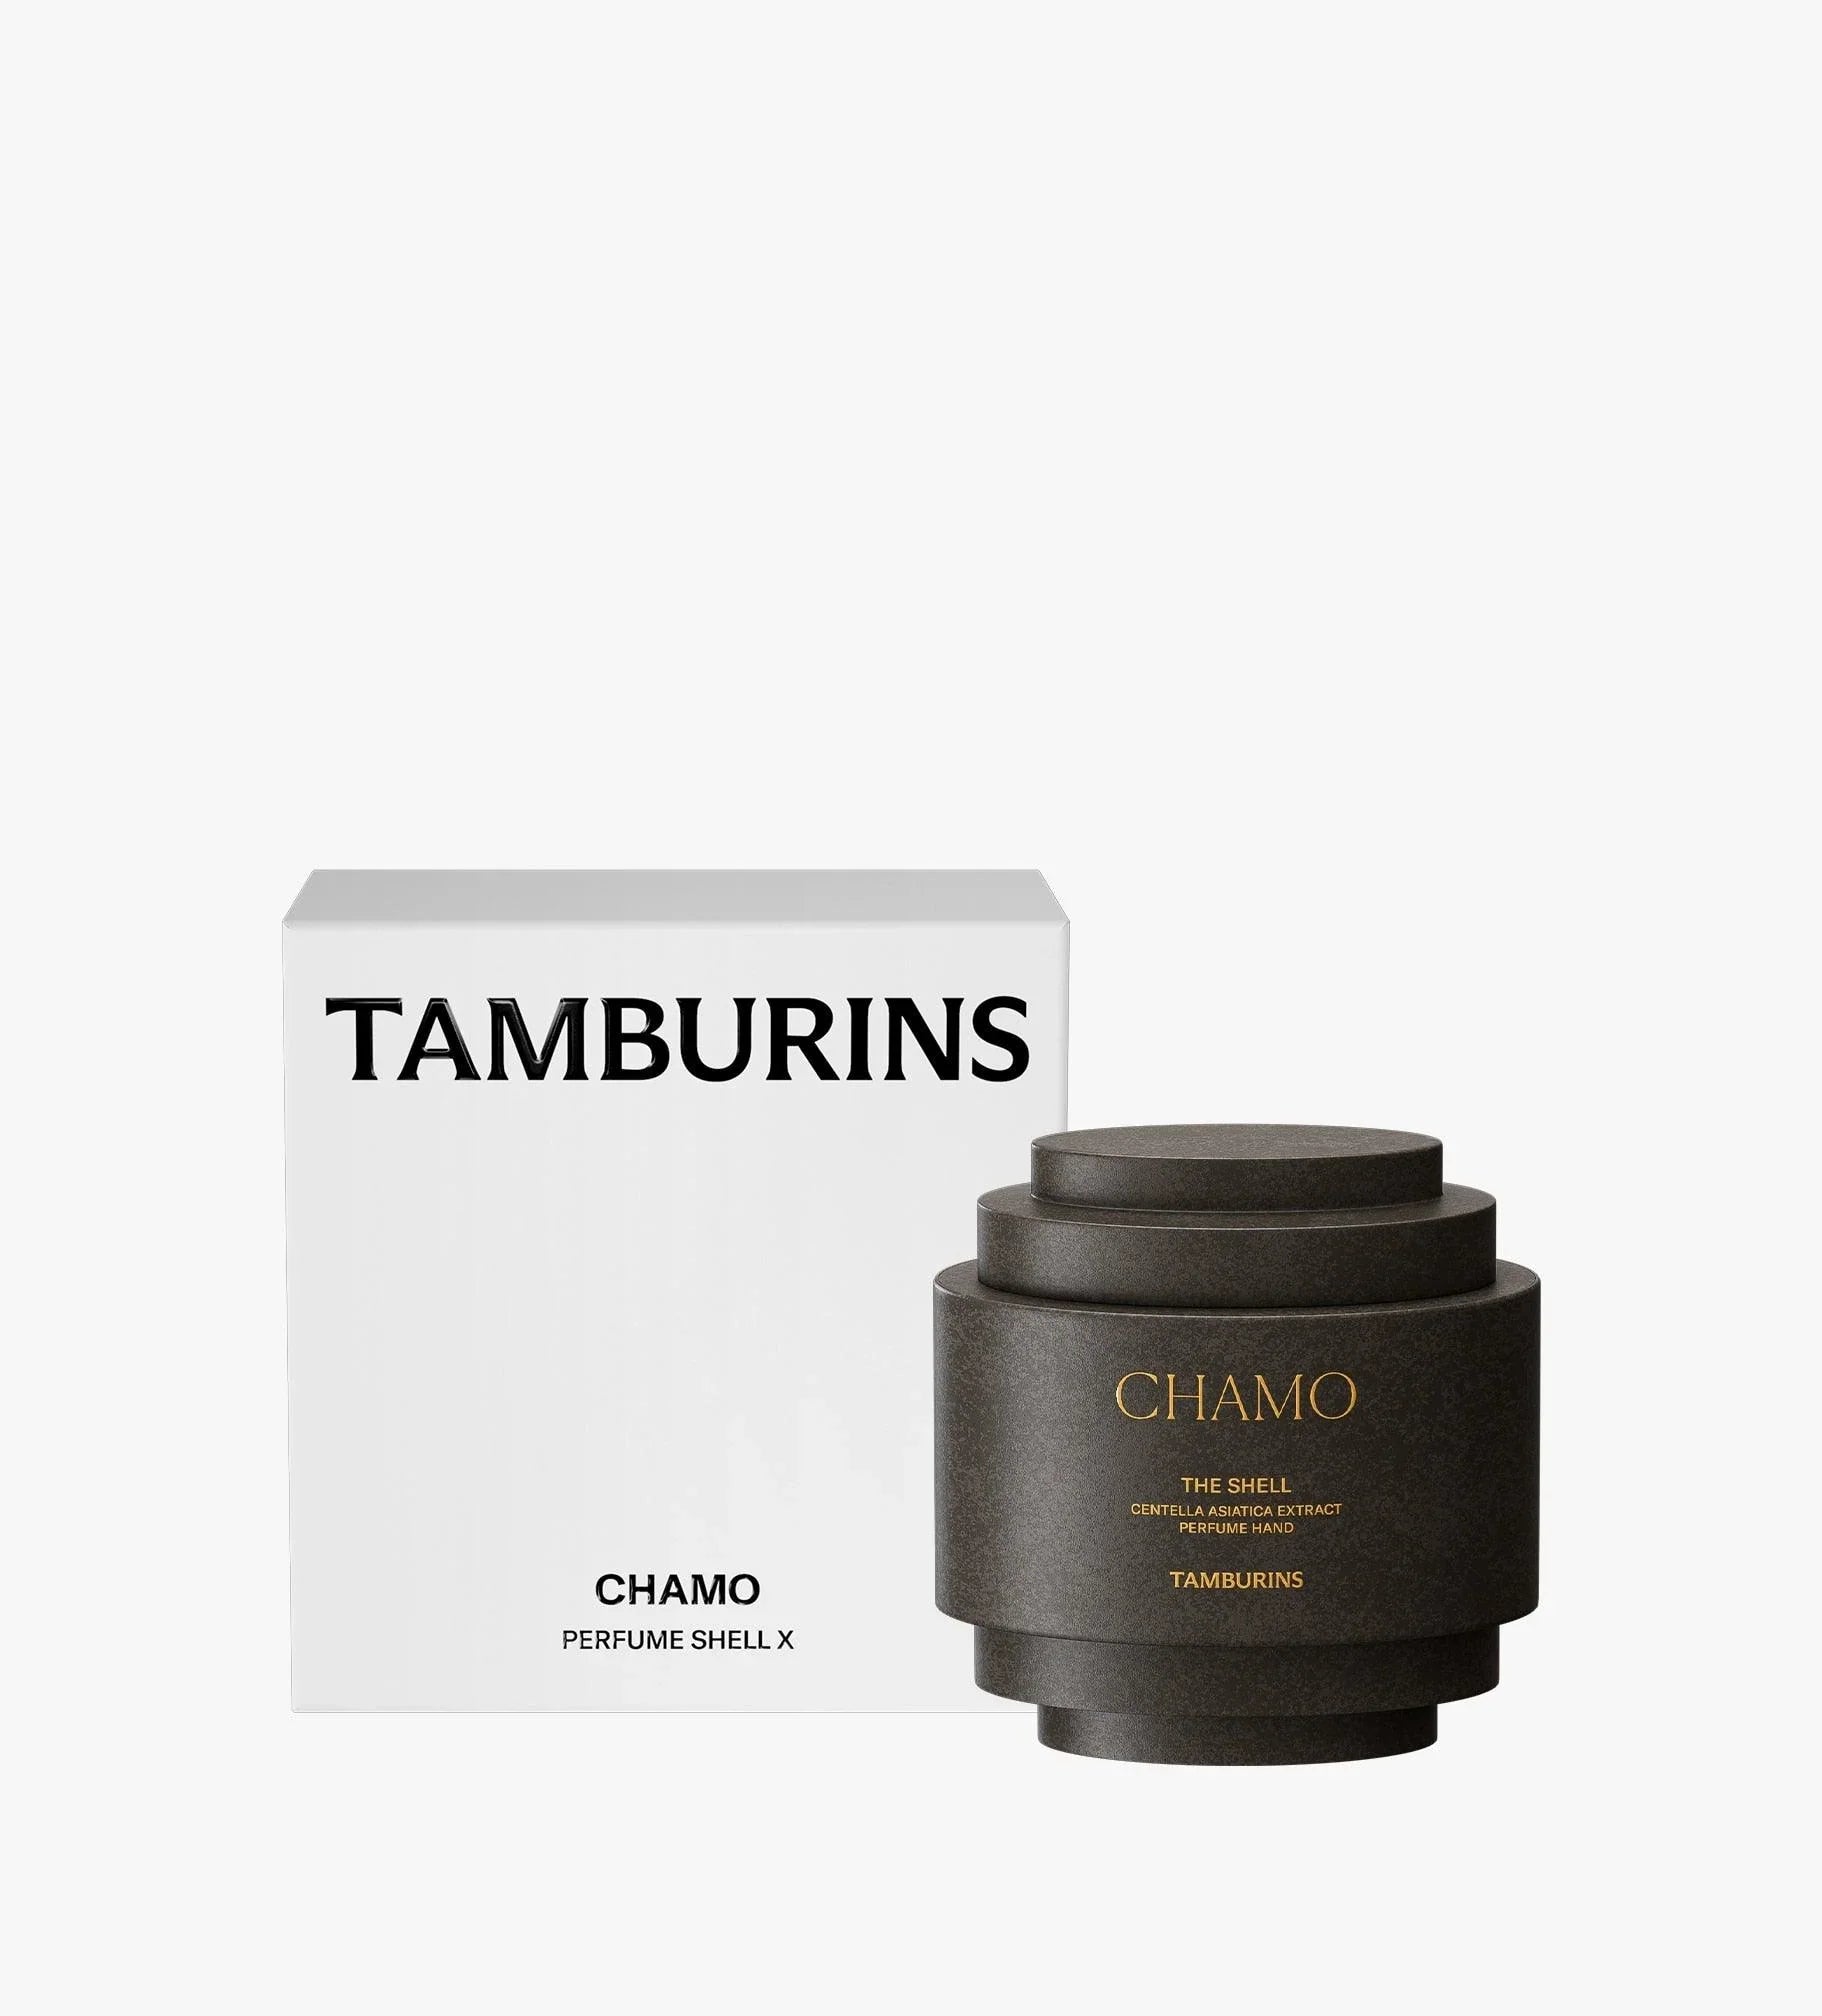 TAMBURINS PERFUME SHELL X CHAMO 30ml - Housed in a unique and stylish shell-shaped bottle, this perfume blends carefully selected notes to create a distinctive and memorable scent.